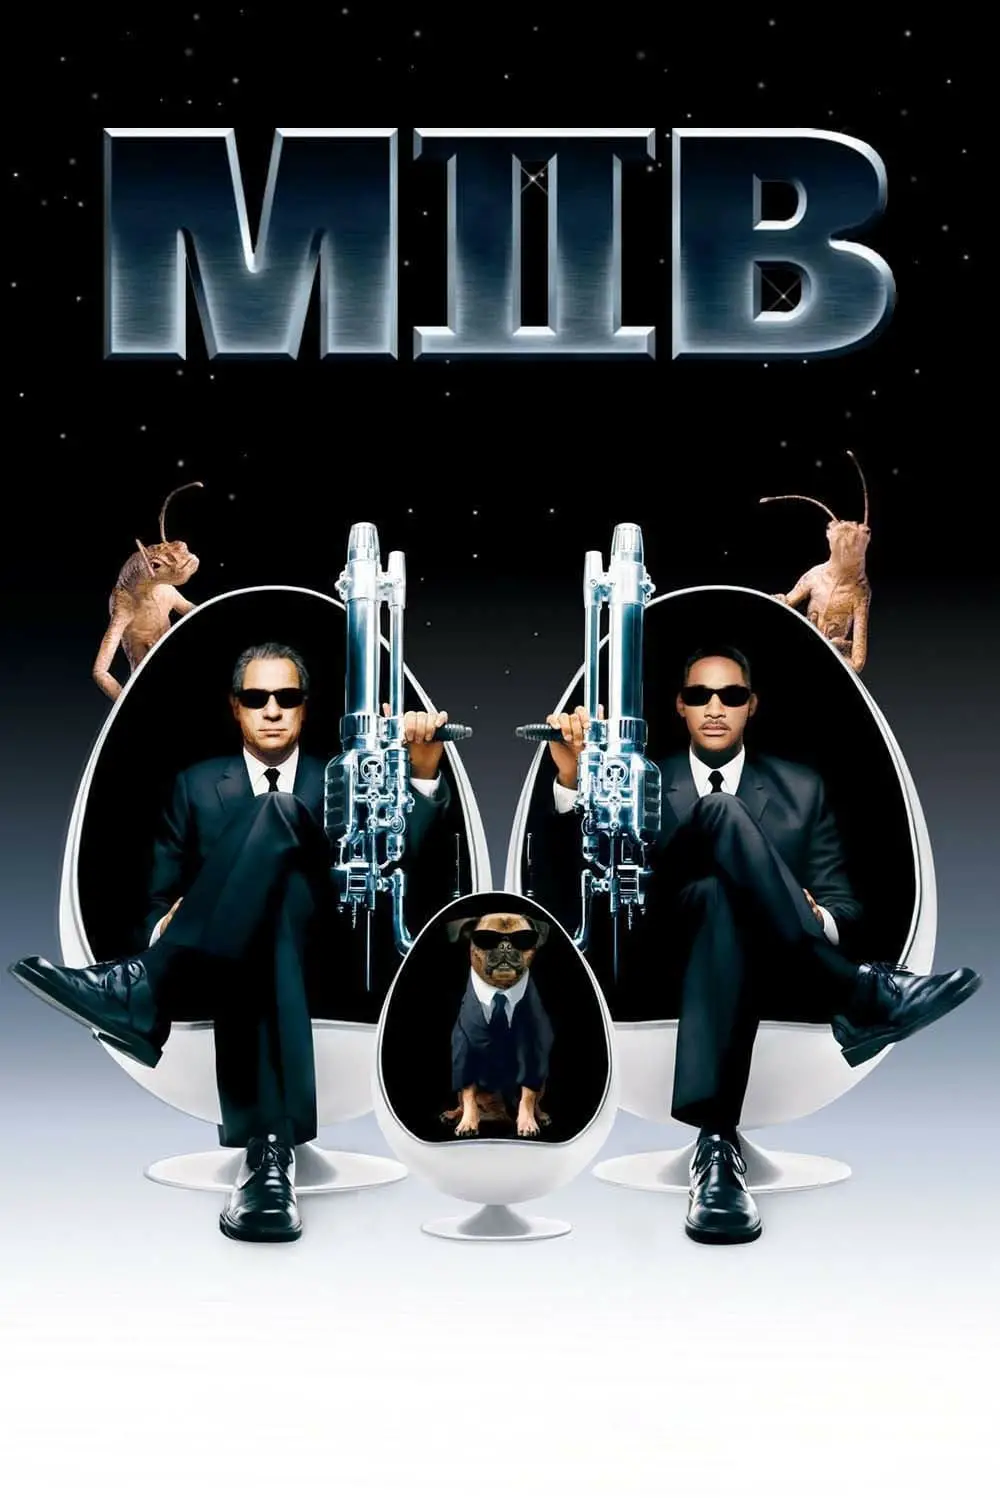 You are currently viewing Men in Black II